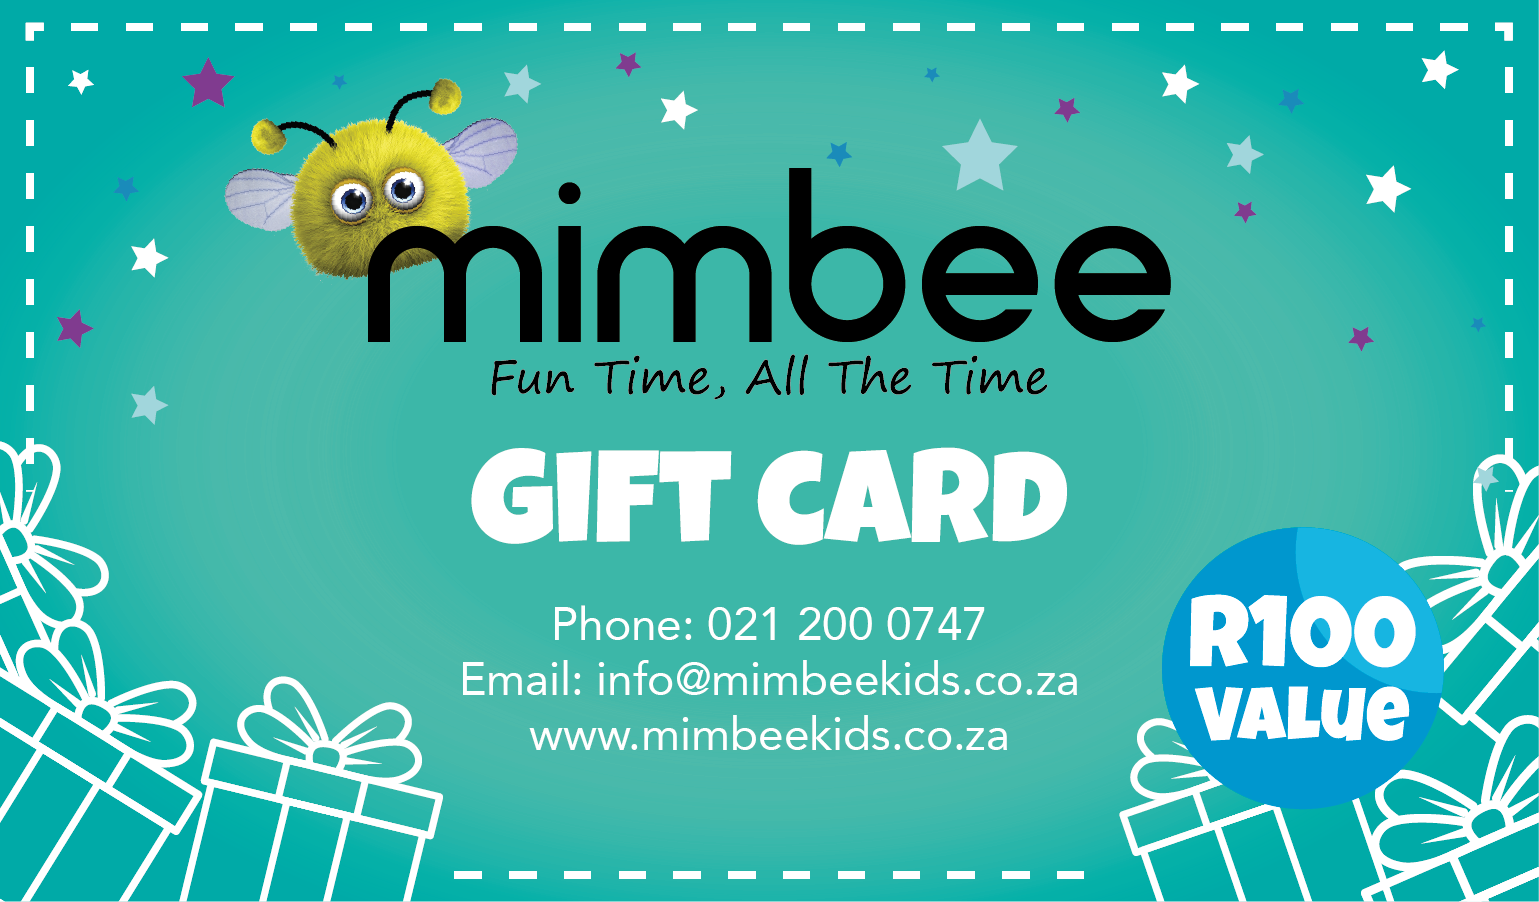 Mimbee Gift Card - Premium Gift Cards from Mimbee Kids - Just R 50! Shop now at Mimbee Kids